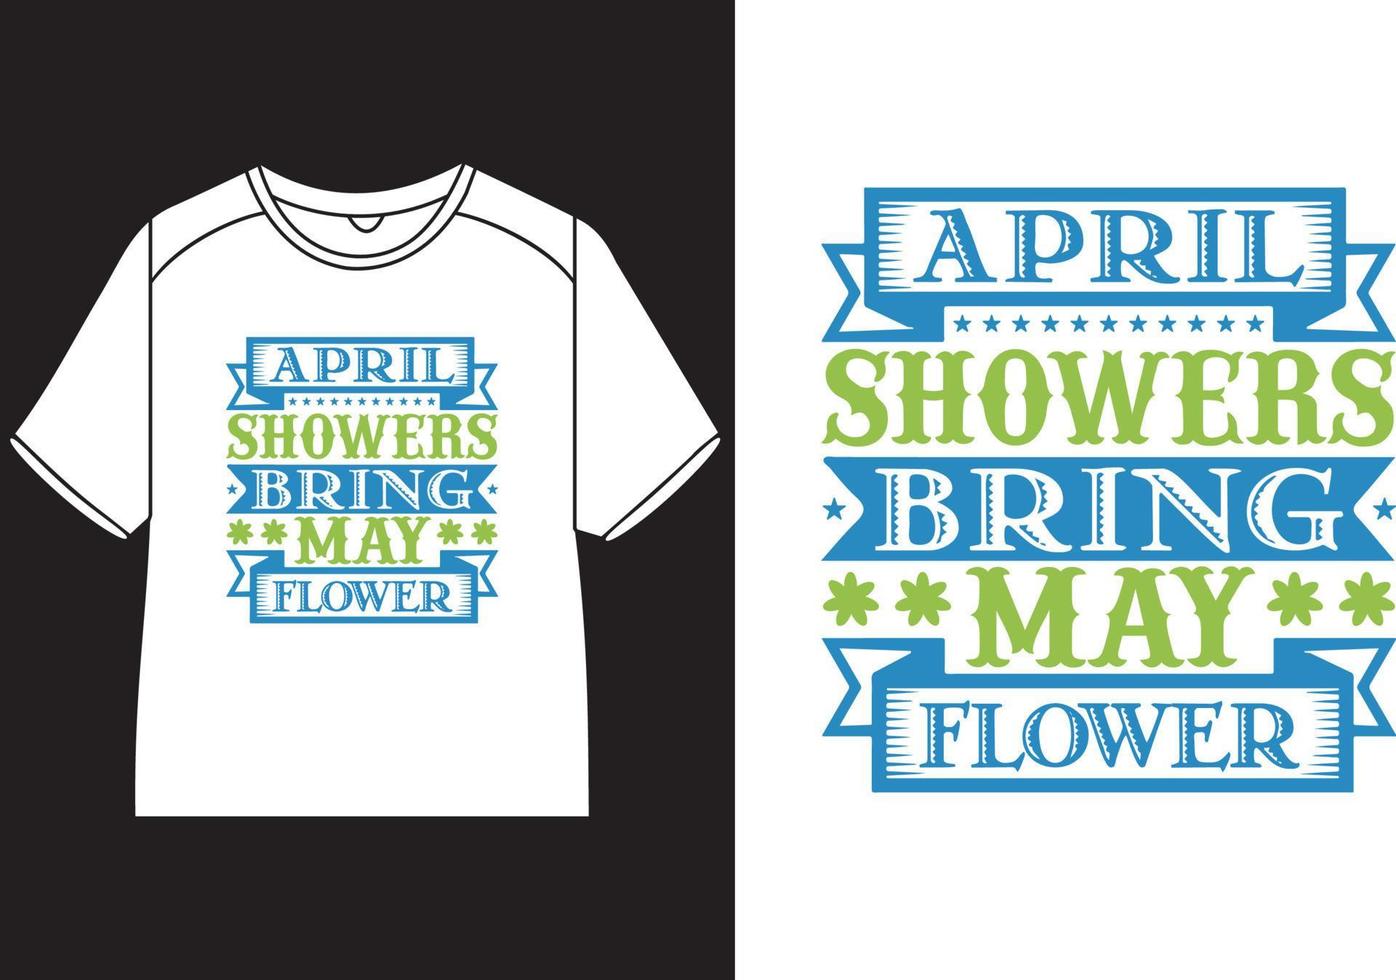 April showers bring may flower T-Shirt Design vector